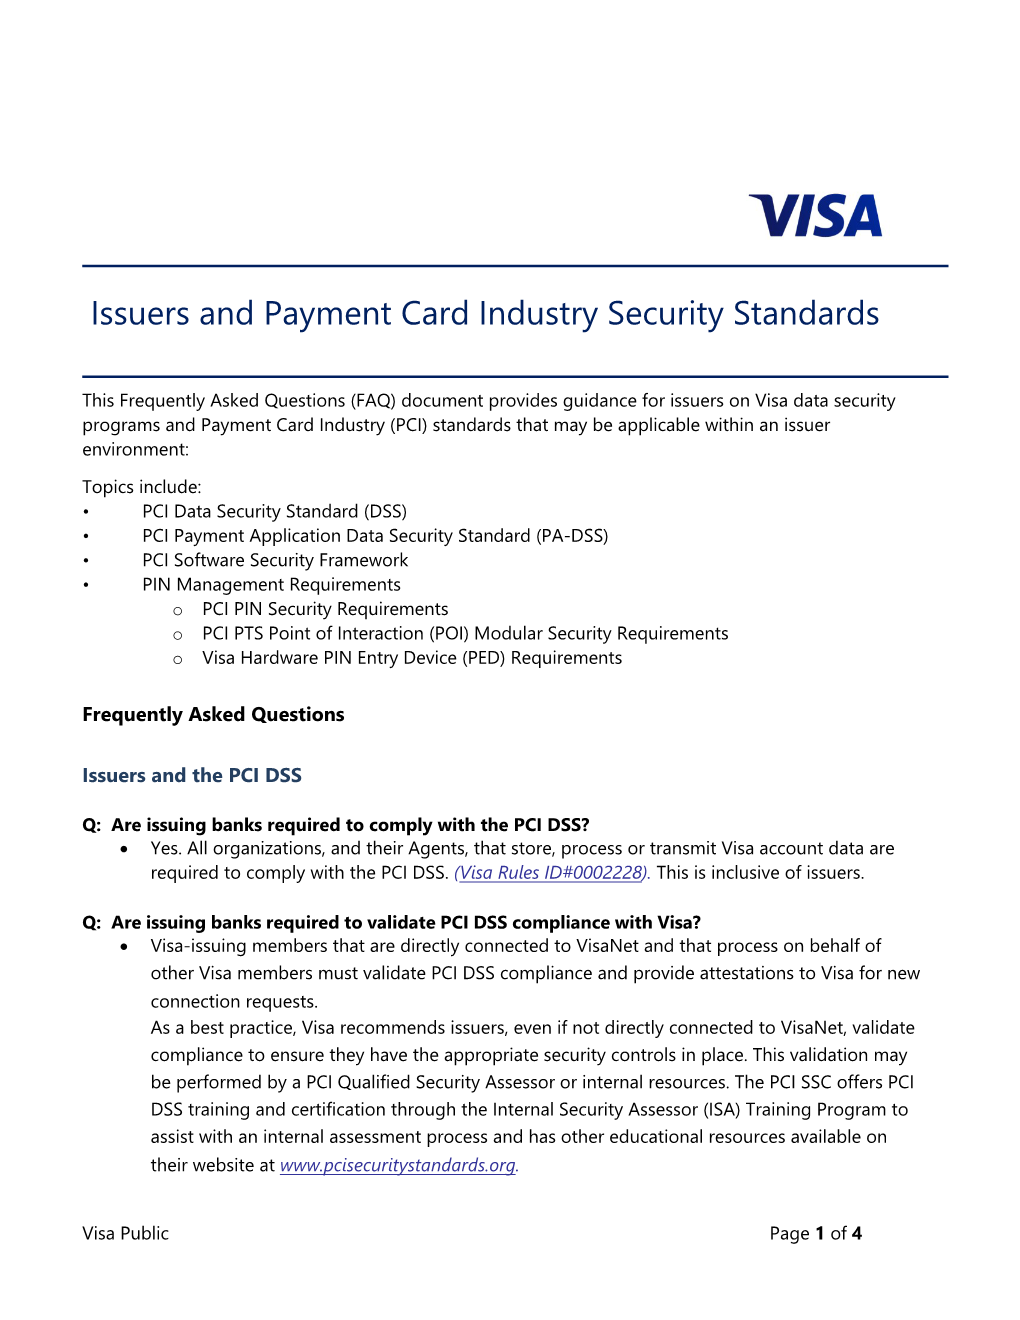 Issuers and Payment Card Industry Security Standards